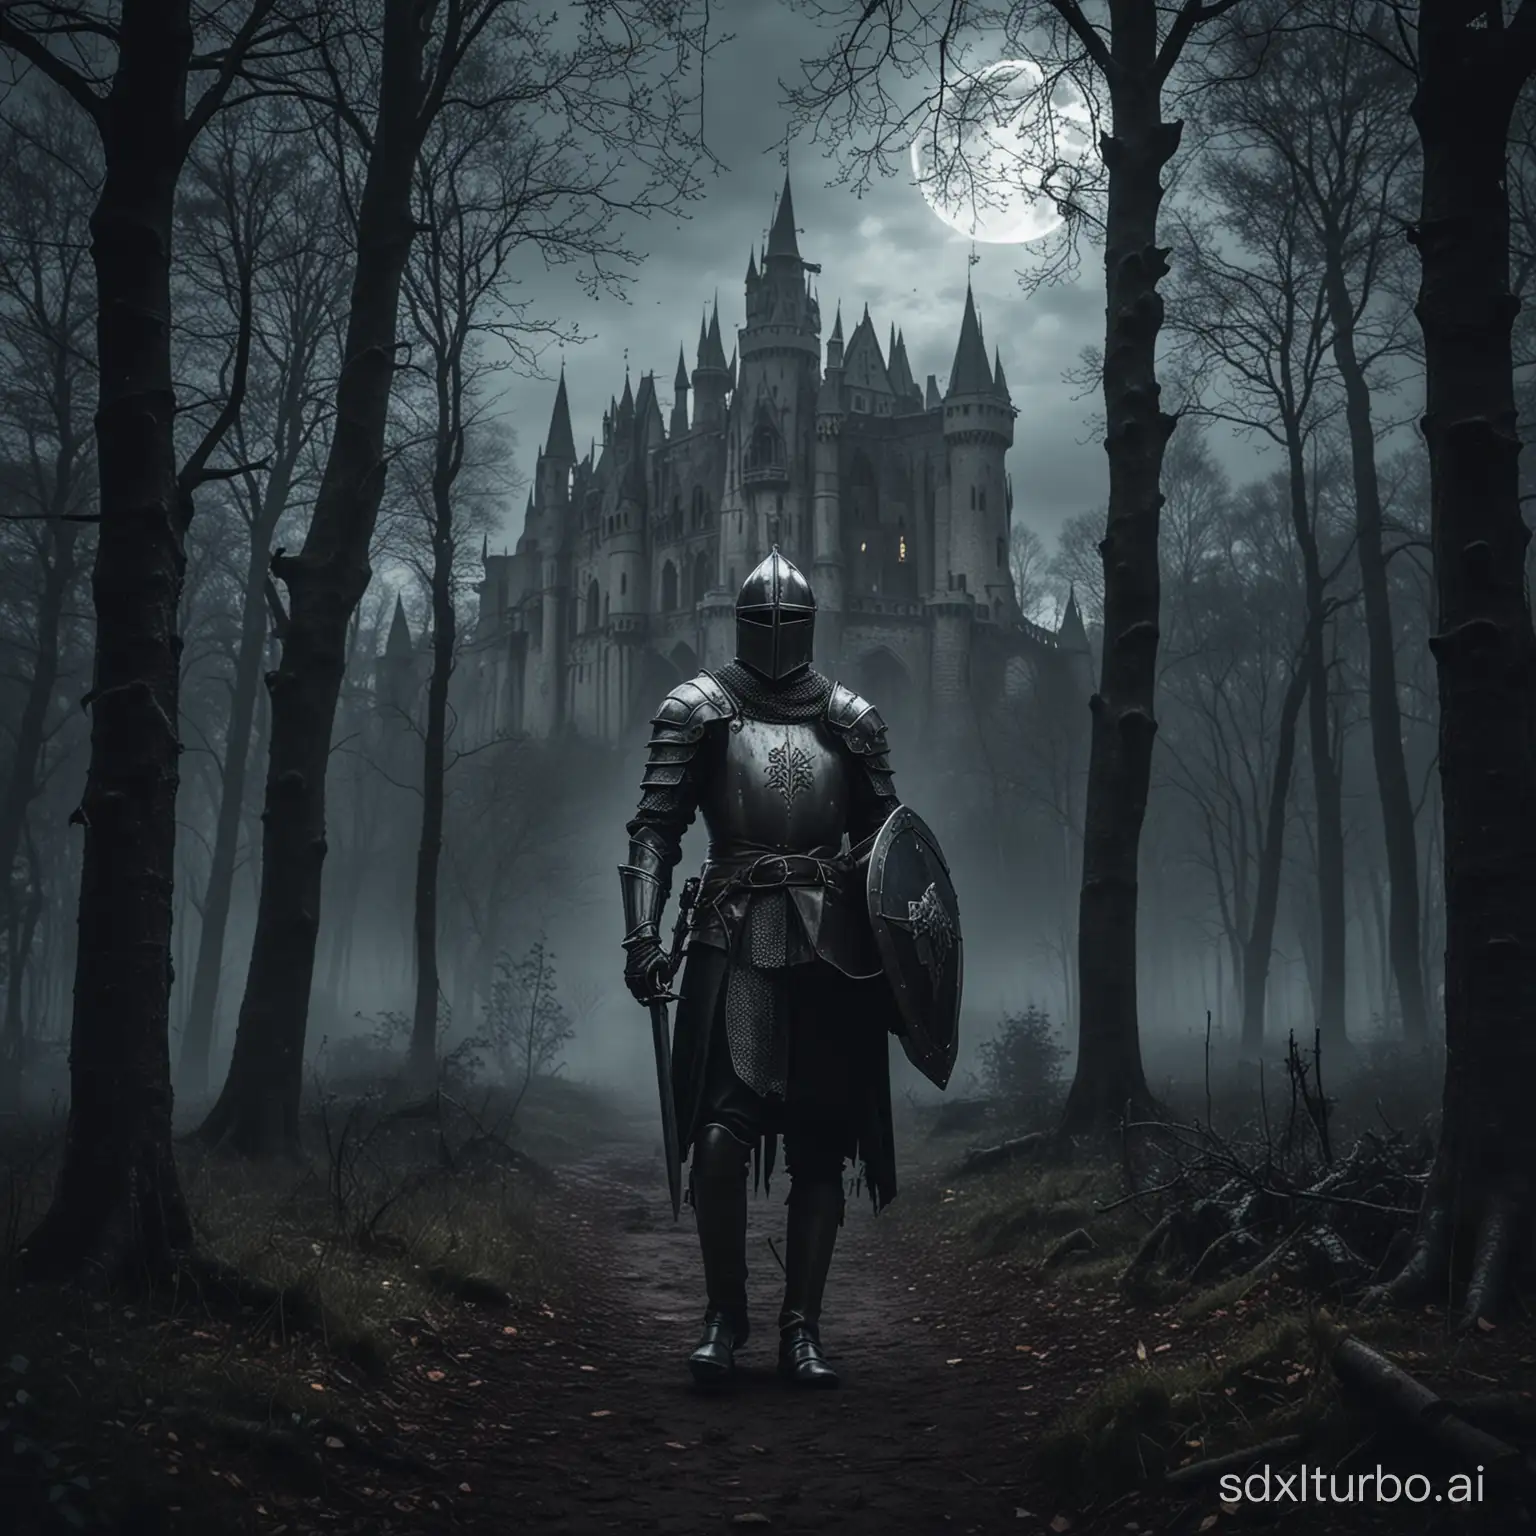 Medieval-Knight-in-Dark-Forest-with-Gothic-Castle-Background